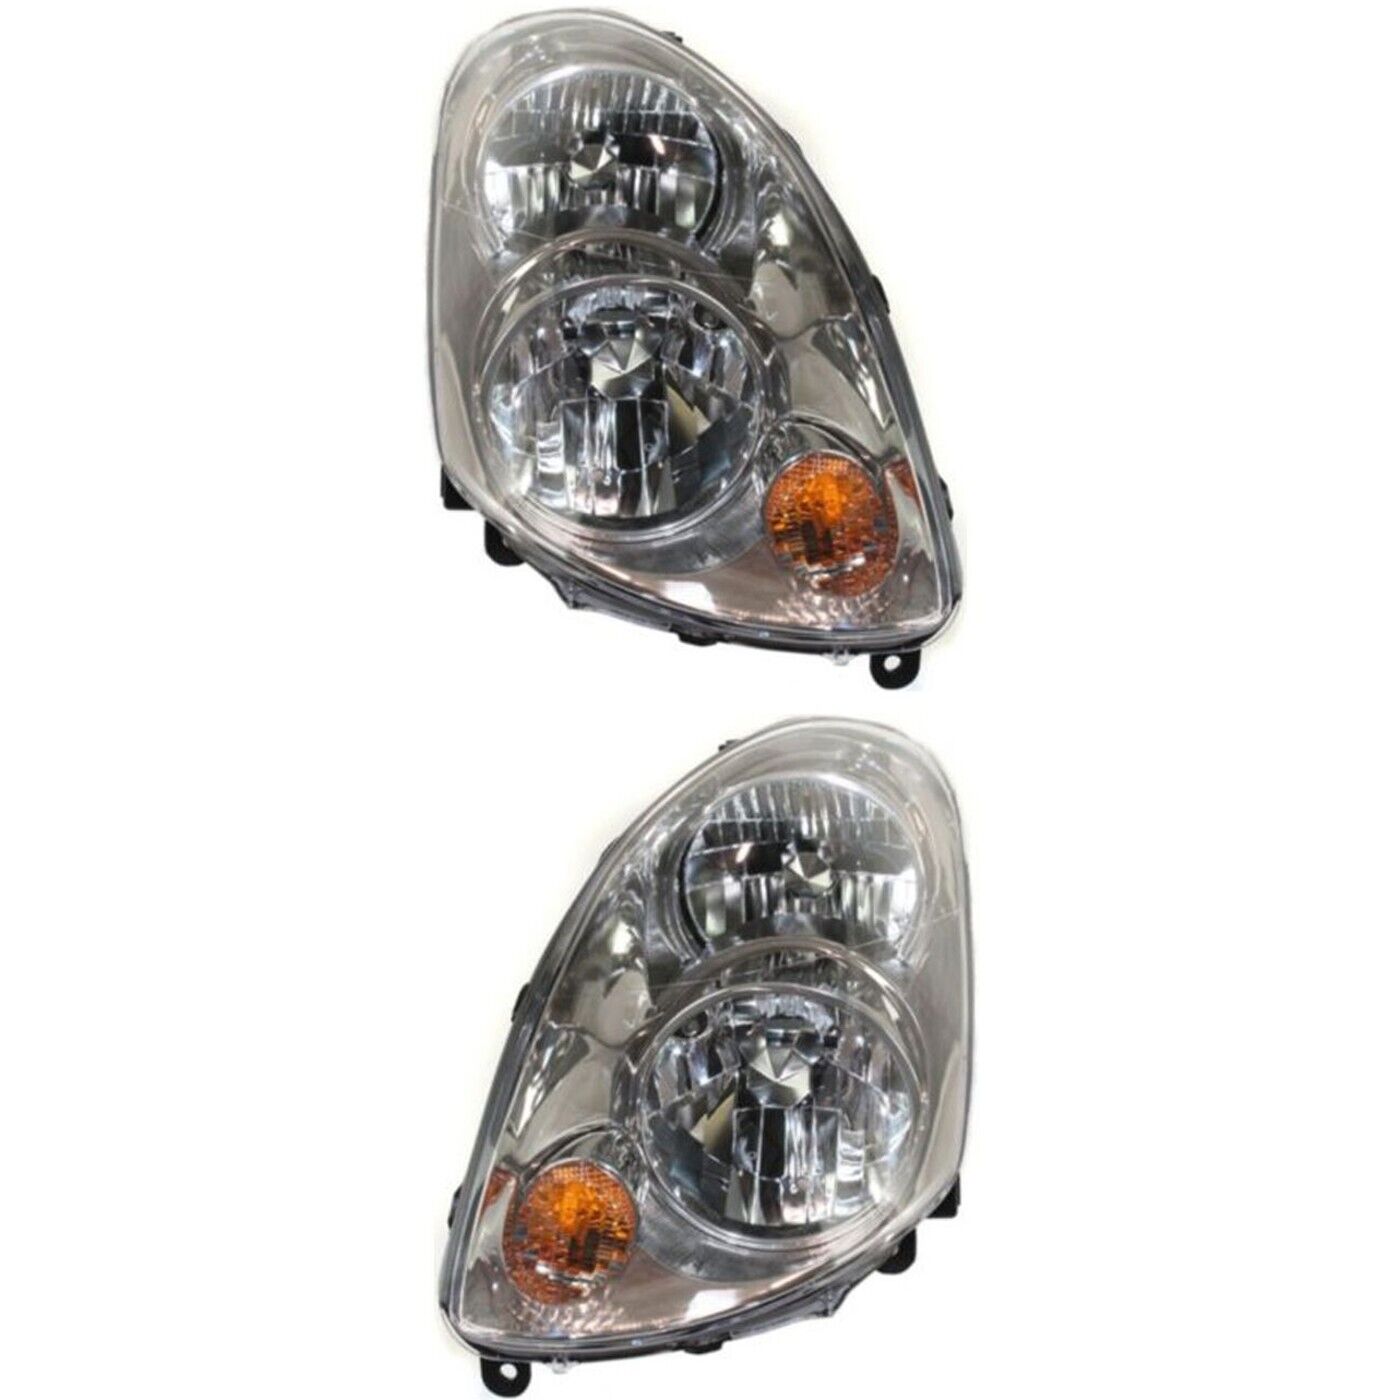 Headlight Assembly Set For 2003 2004 Infiniti G35 Sedan Left and Right With Bulb